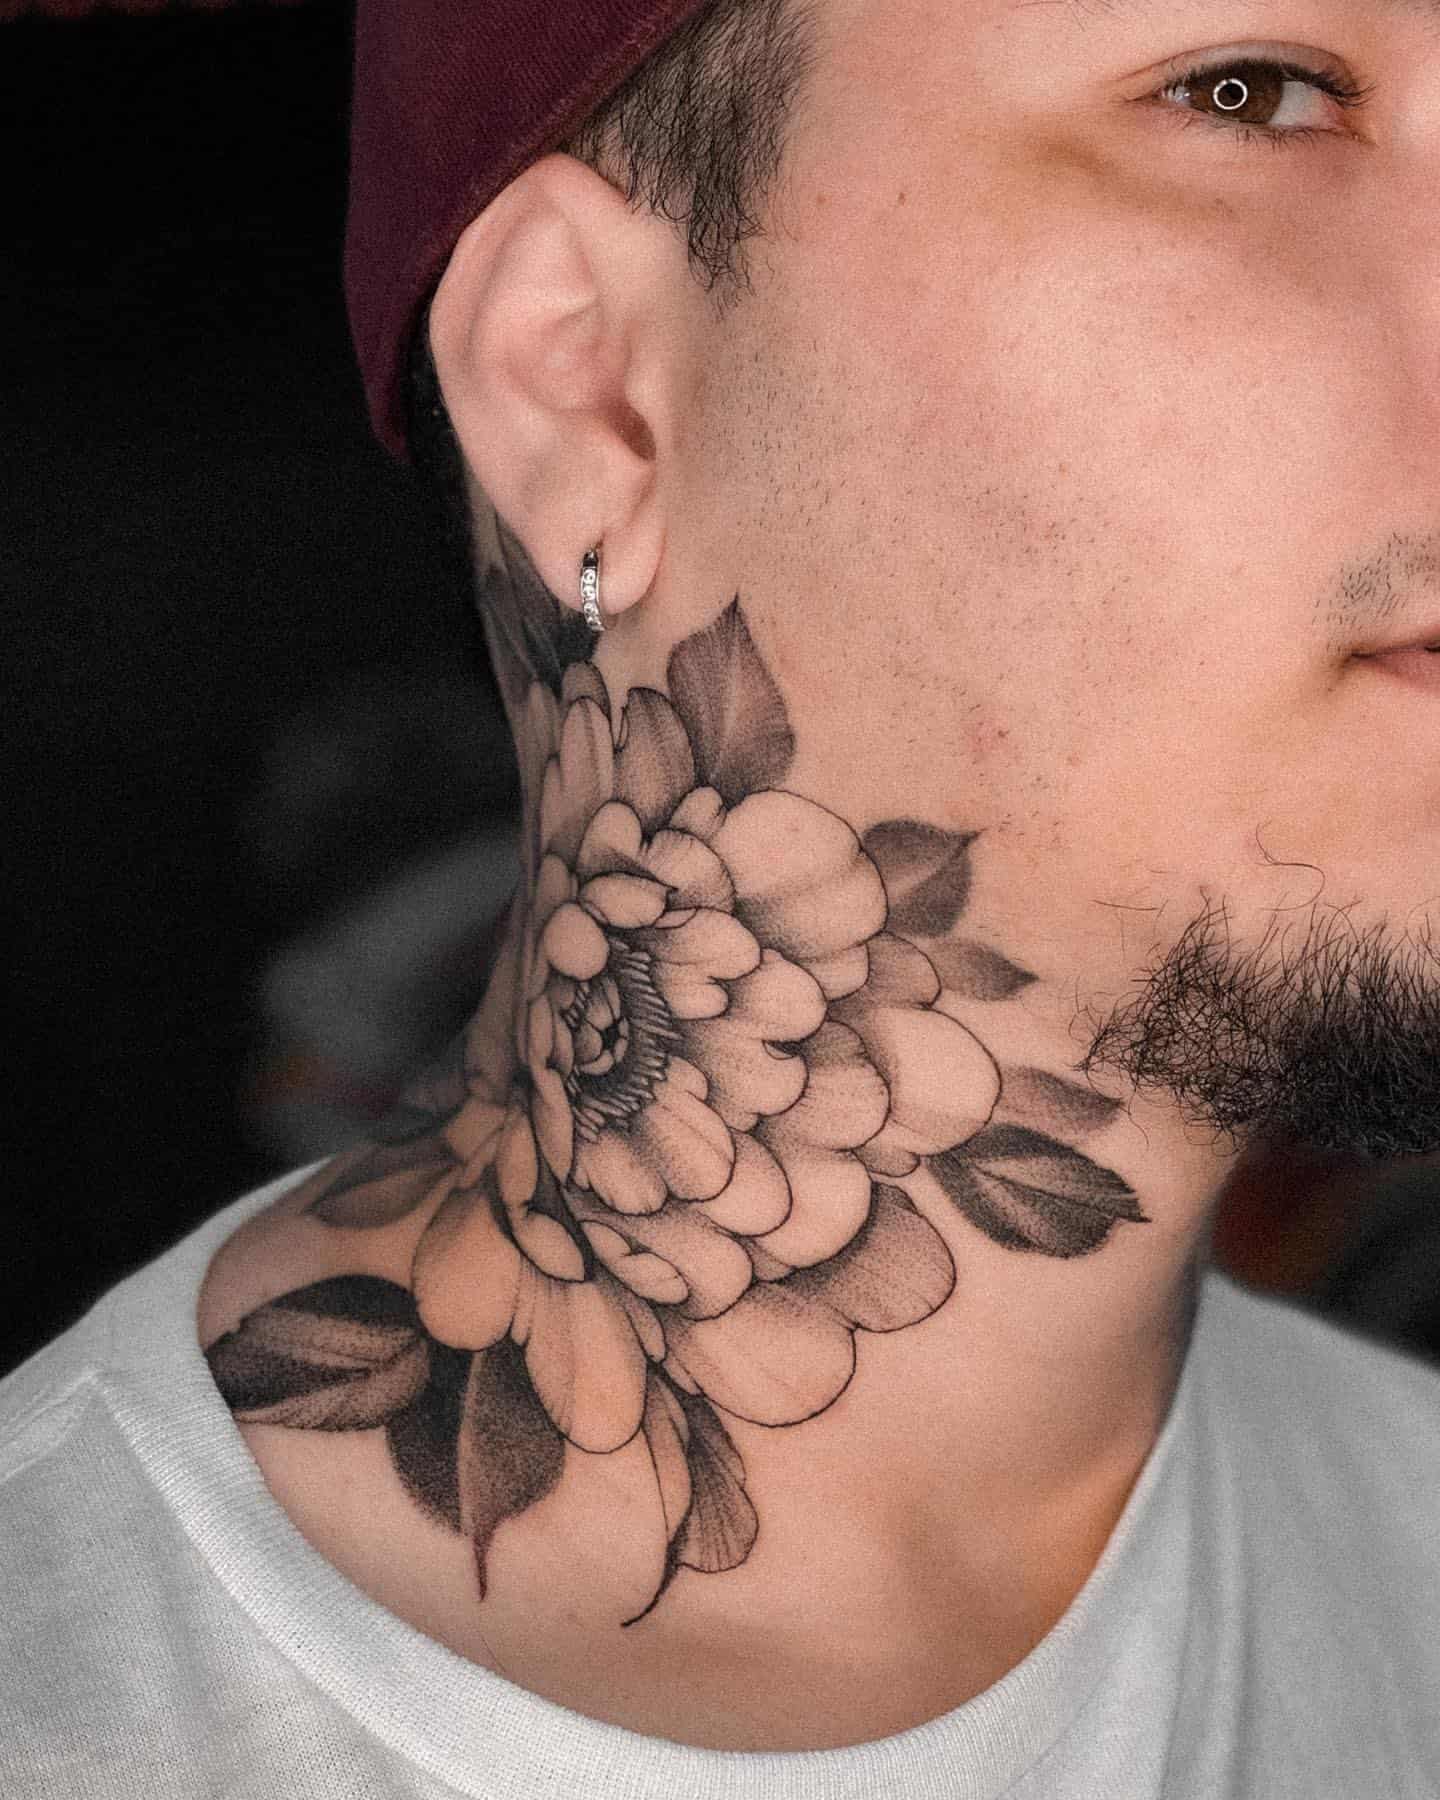 flowers neck tattoo | Bulldog tattoo and champagne lover | Flickr